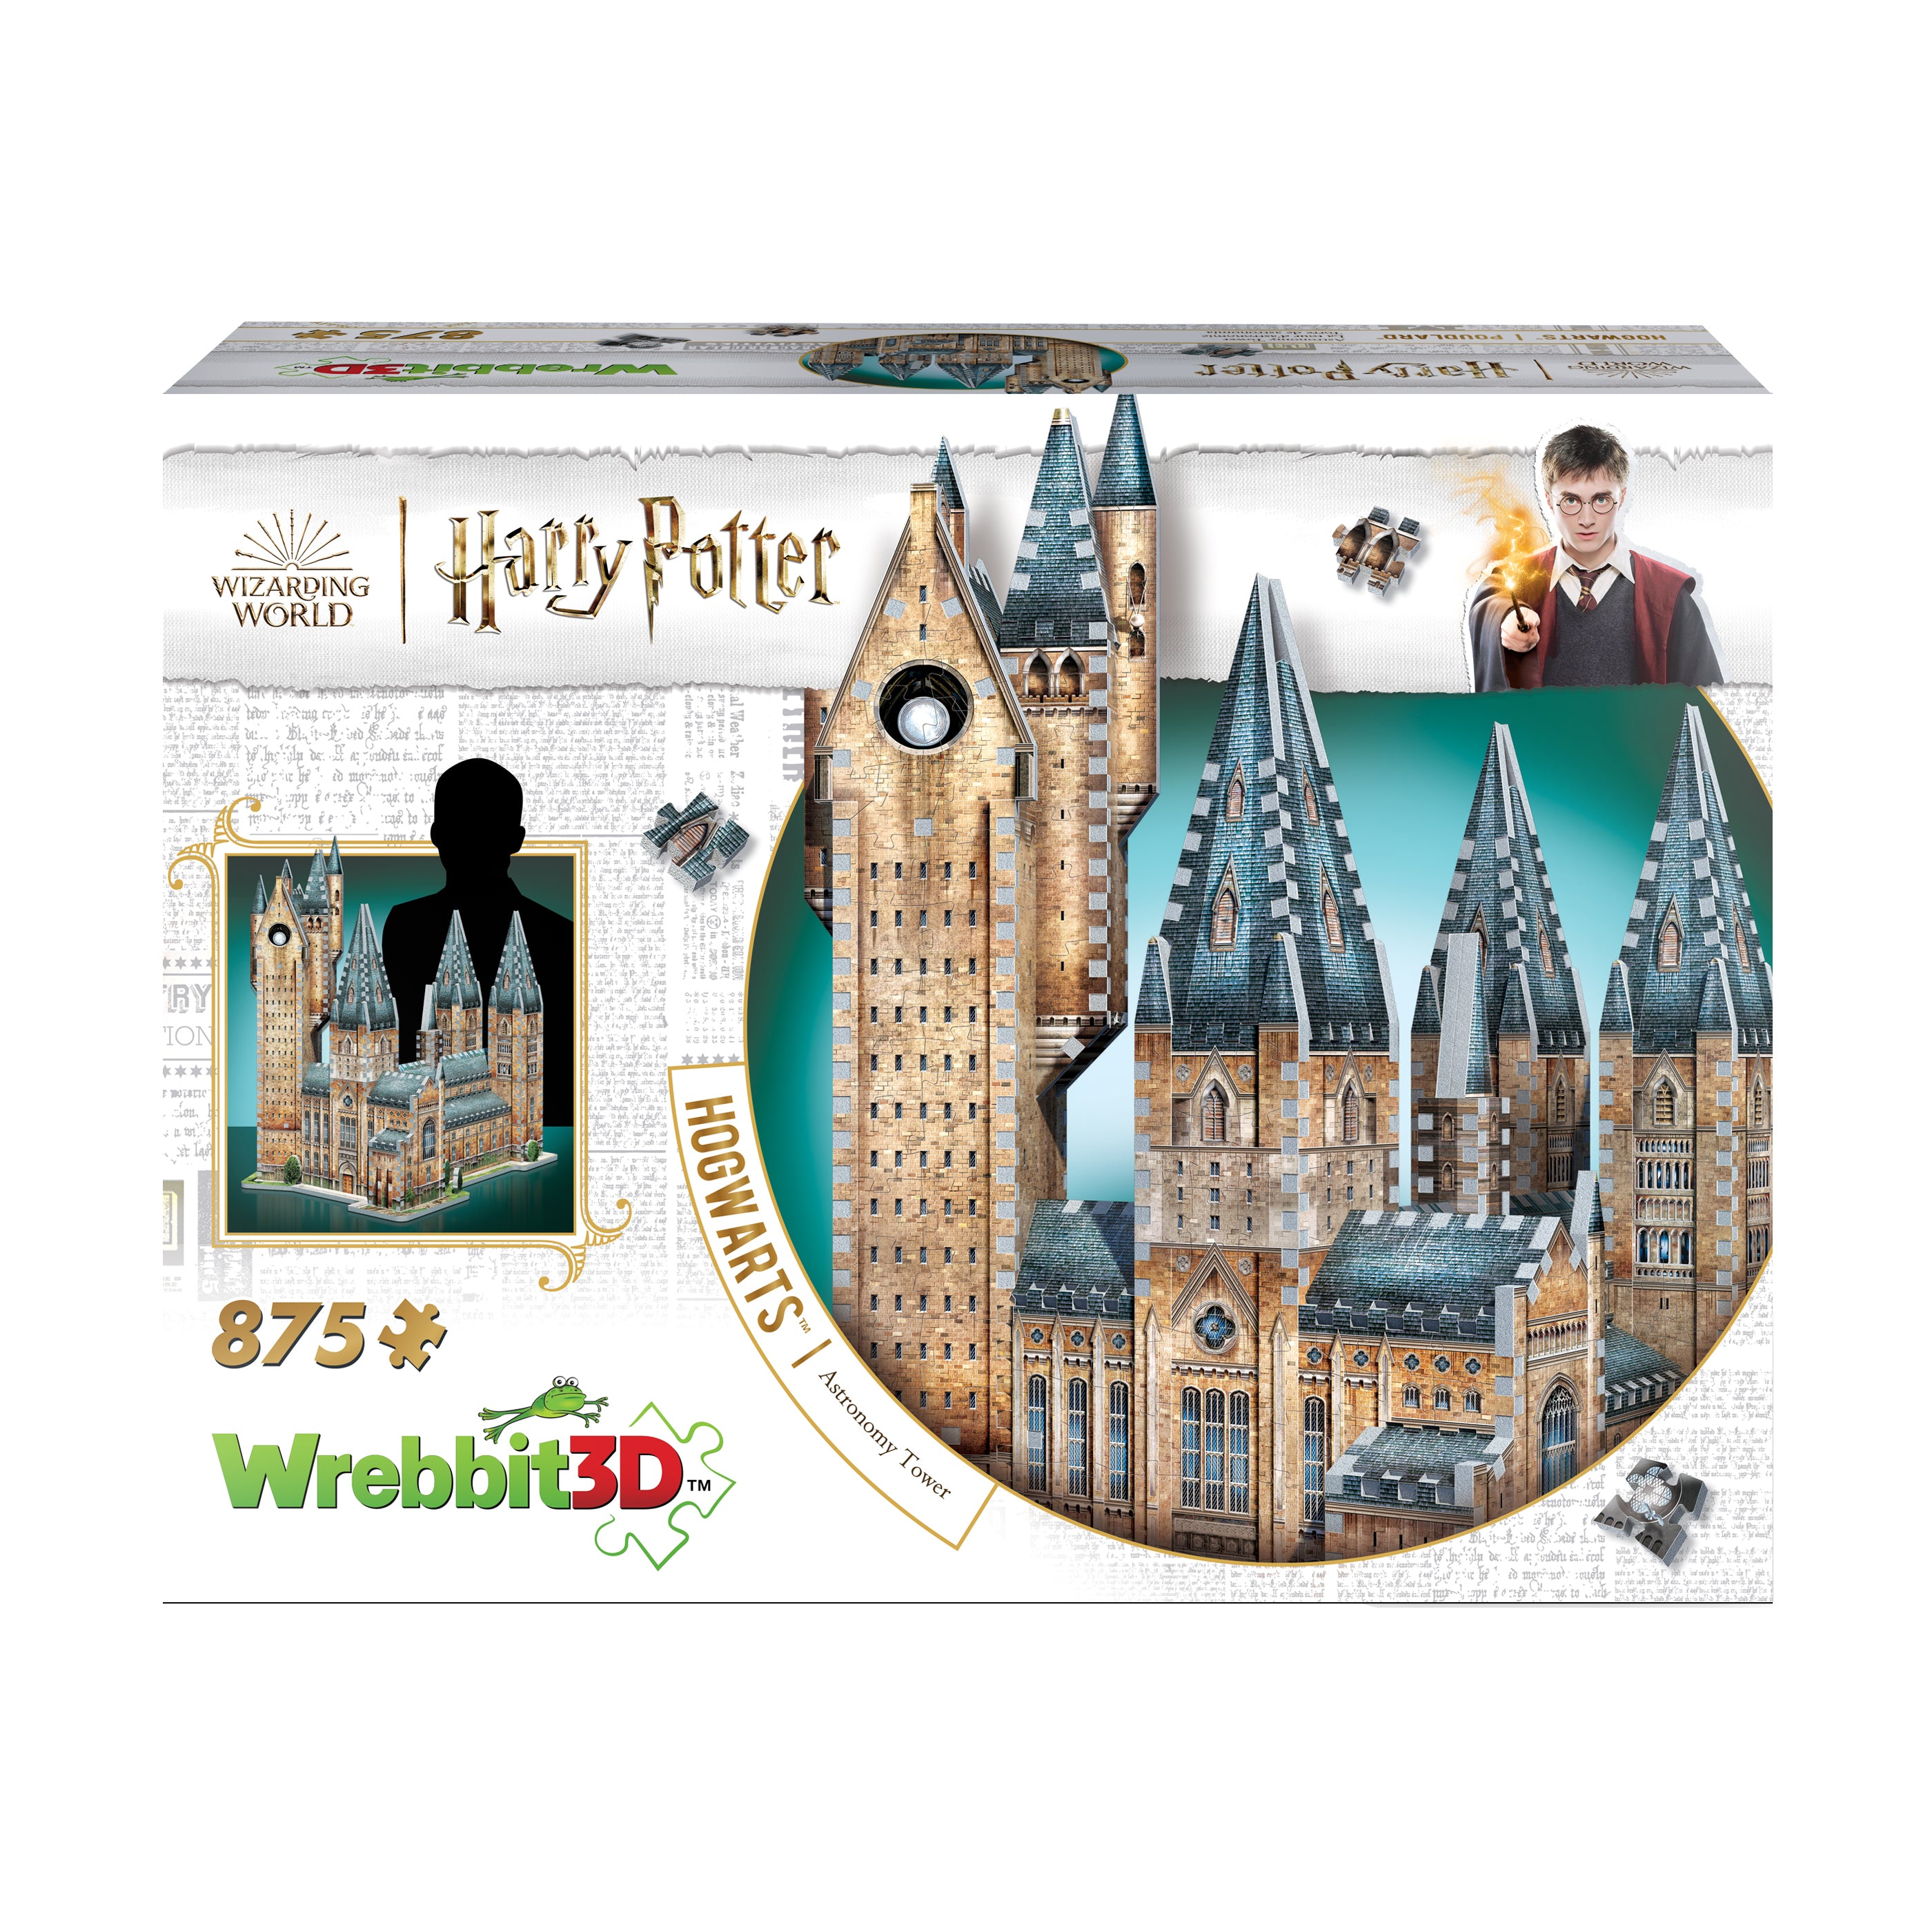 Harry Potter Collection - Hogwarts - Astronomy Tower 3D Puzzle: 875 Pcs